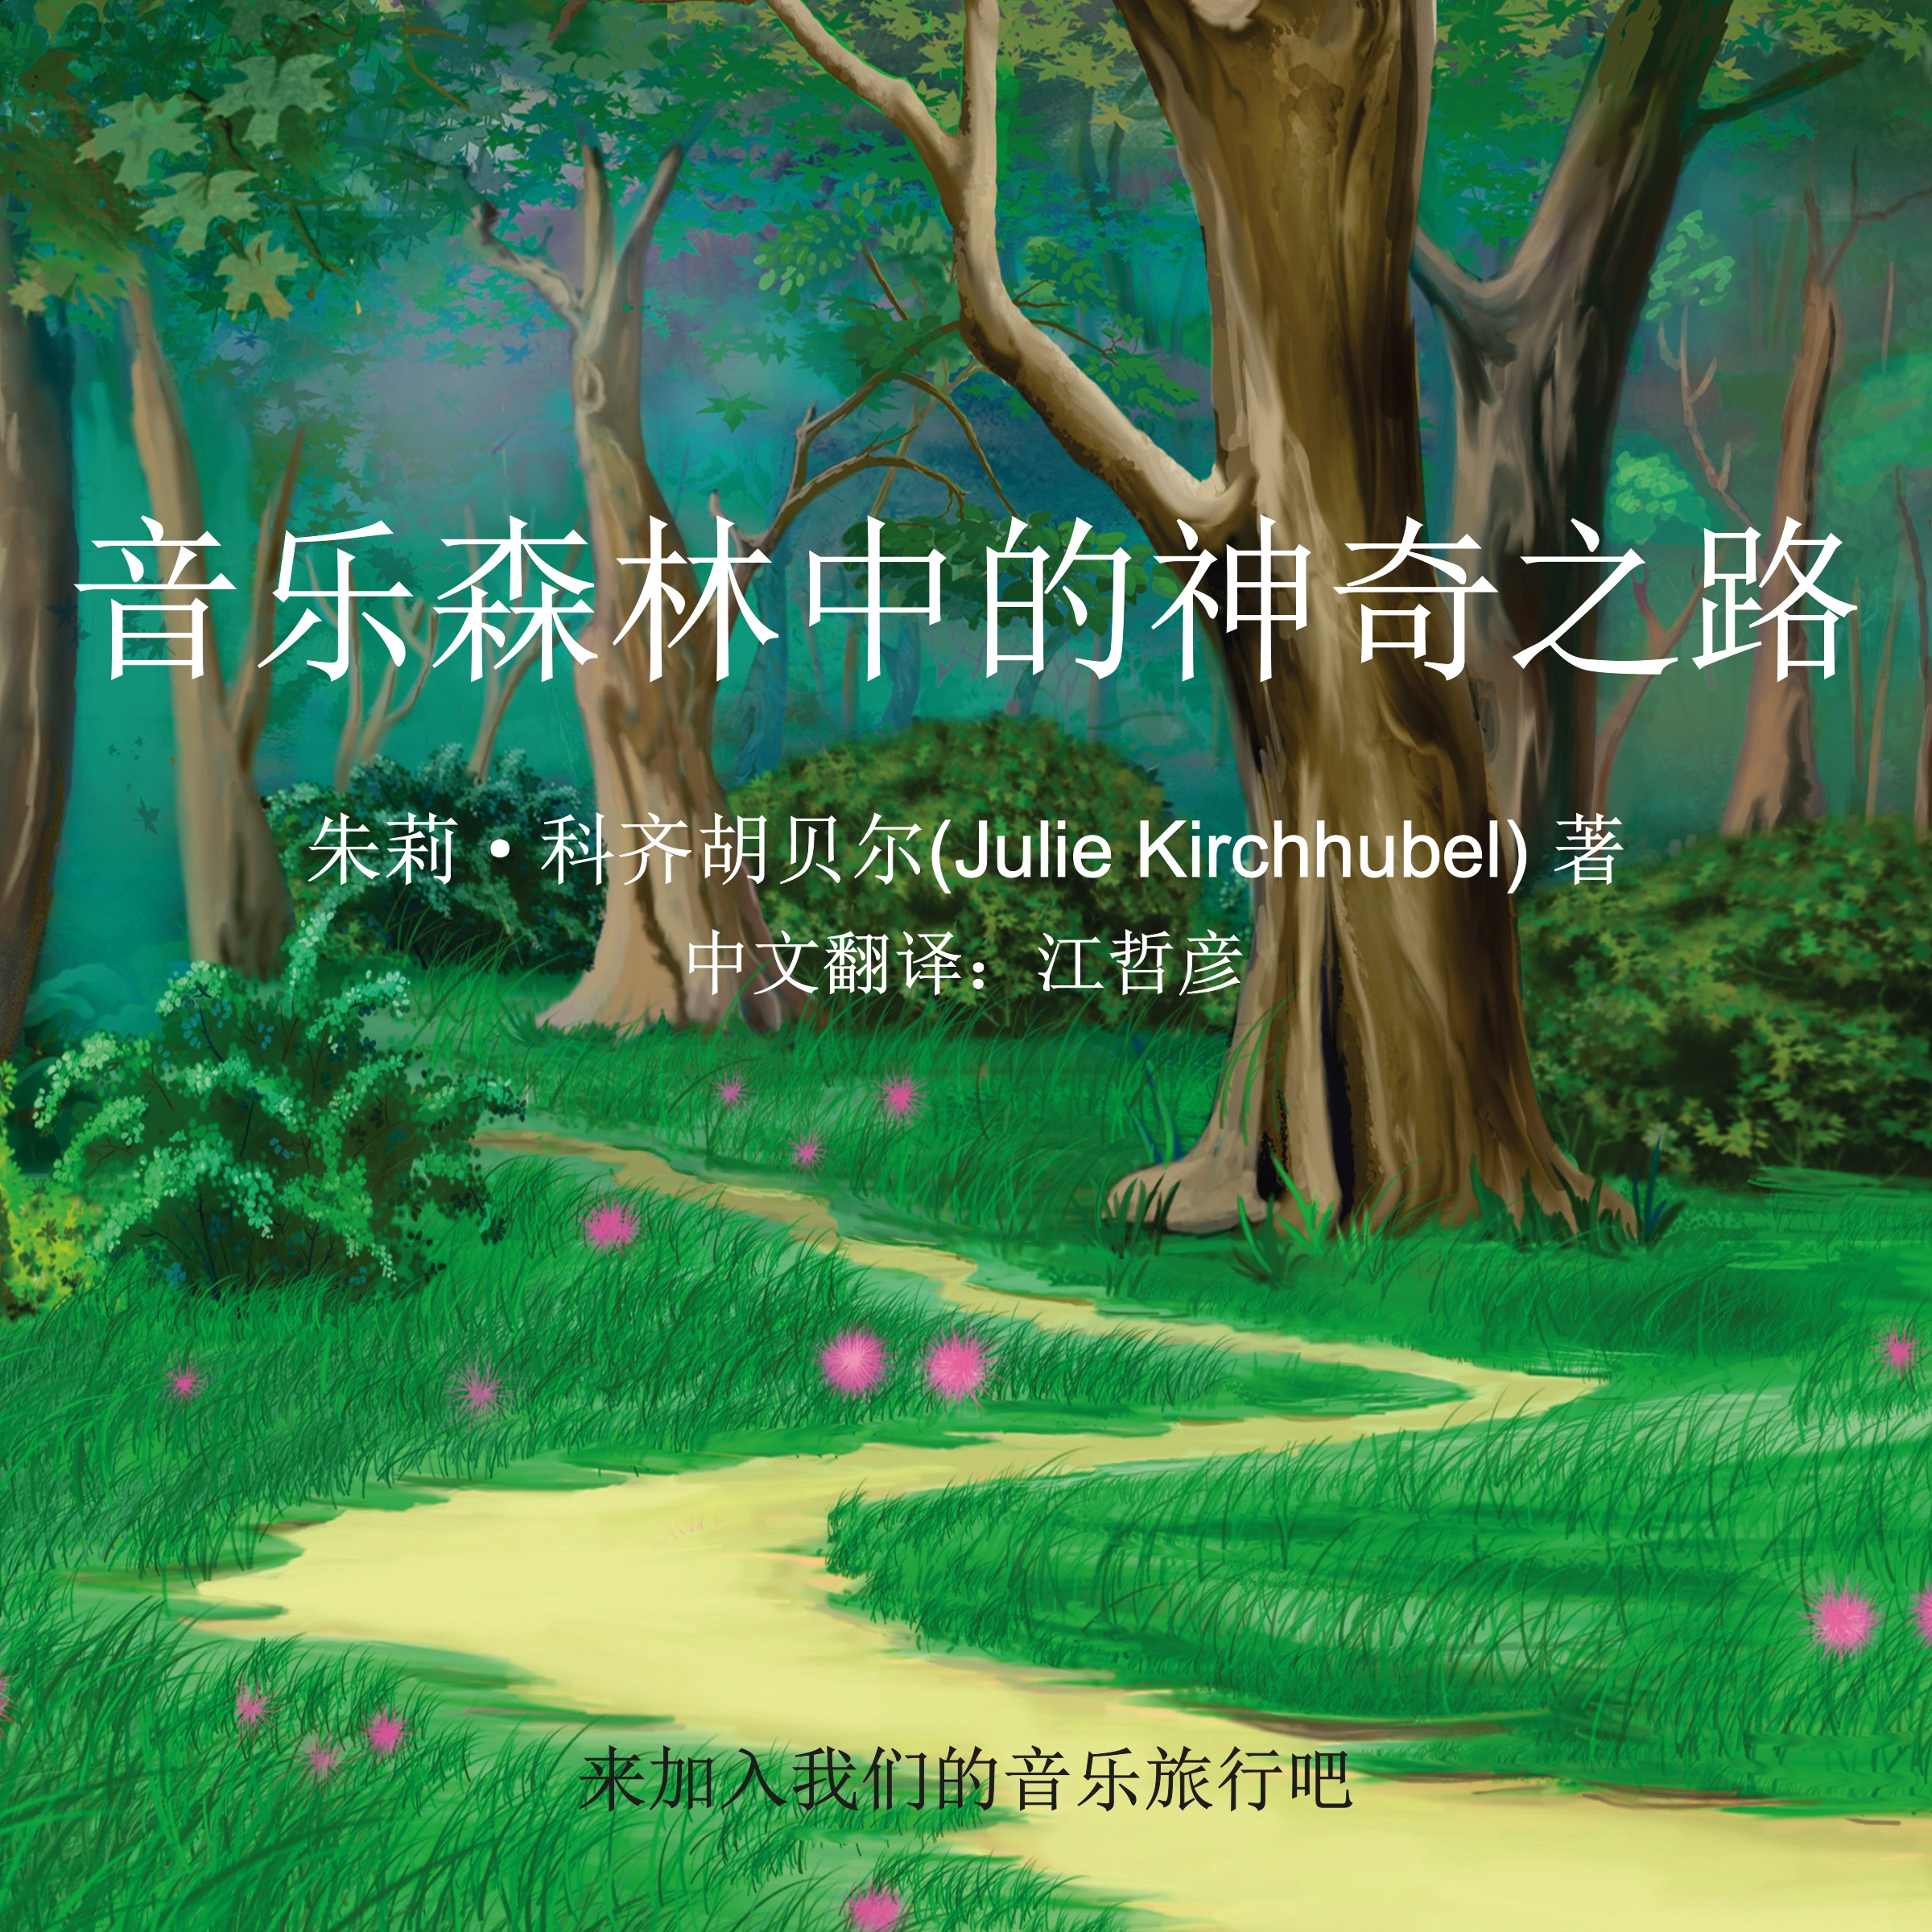 The Magical Path In The Musical Forest - Chinese Audiobook by Julie Kirchhubel